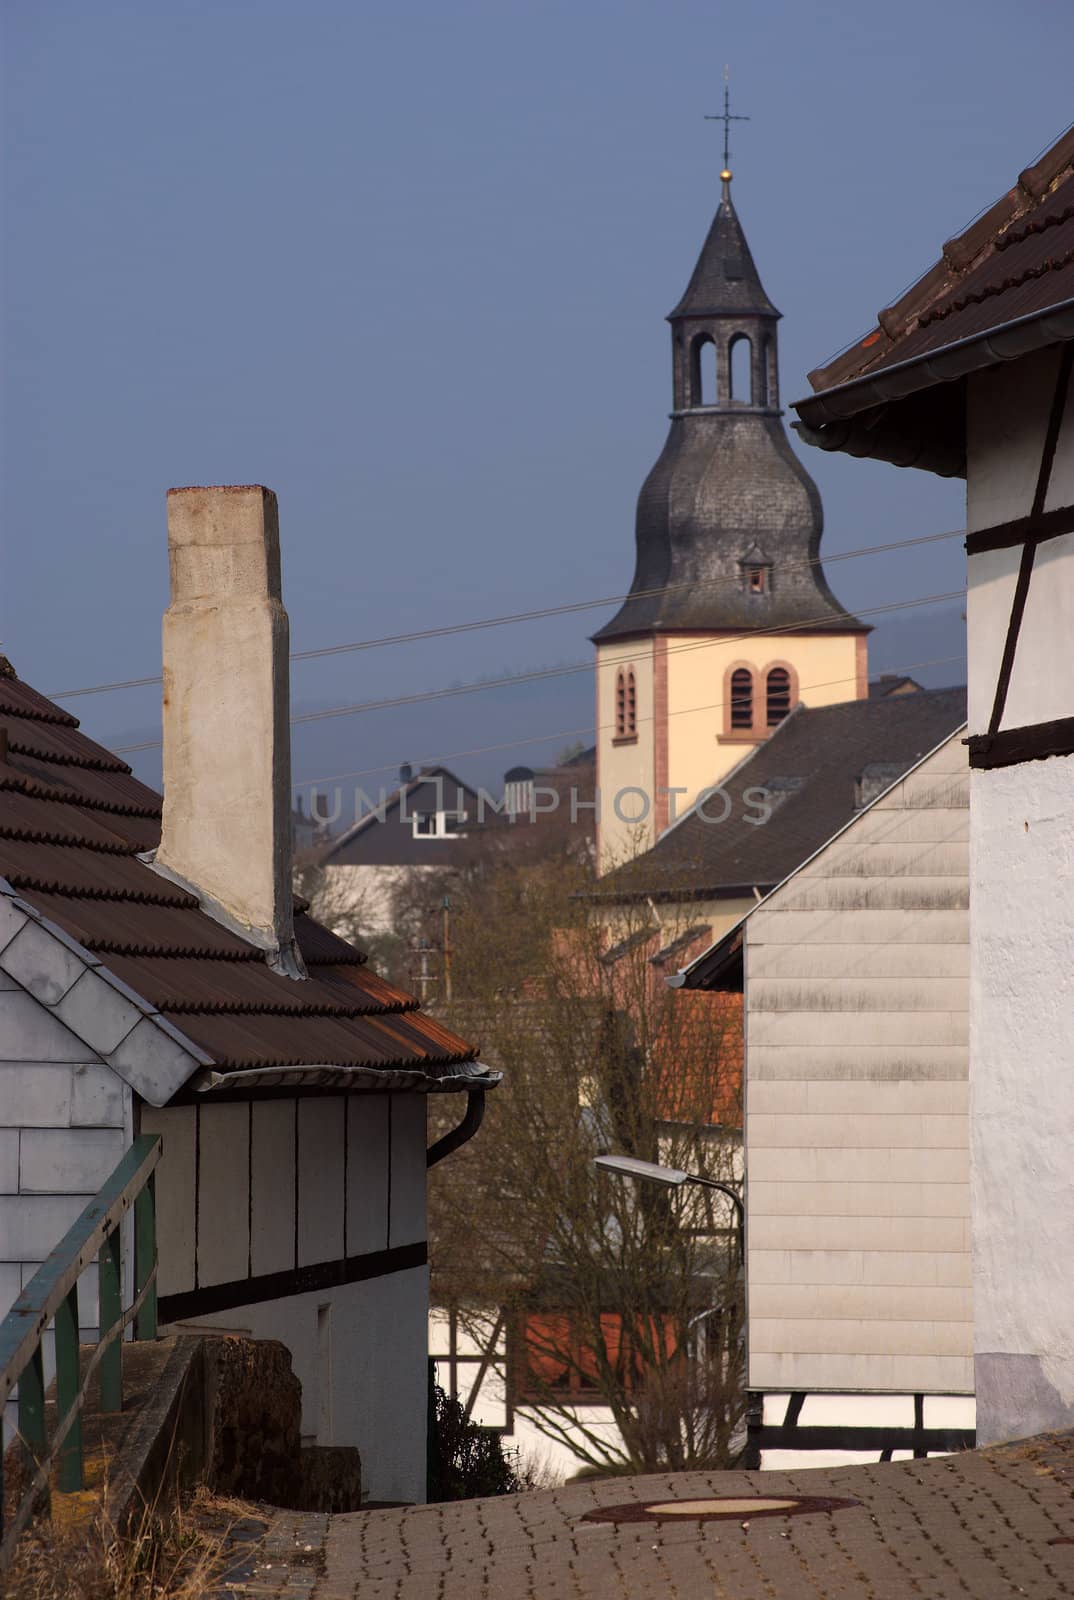 Belltower between traditional old houses in town Heimbach, Germany